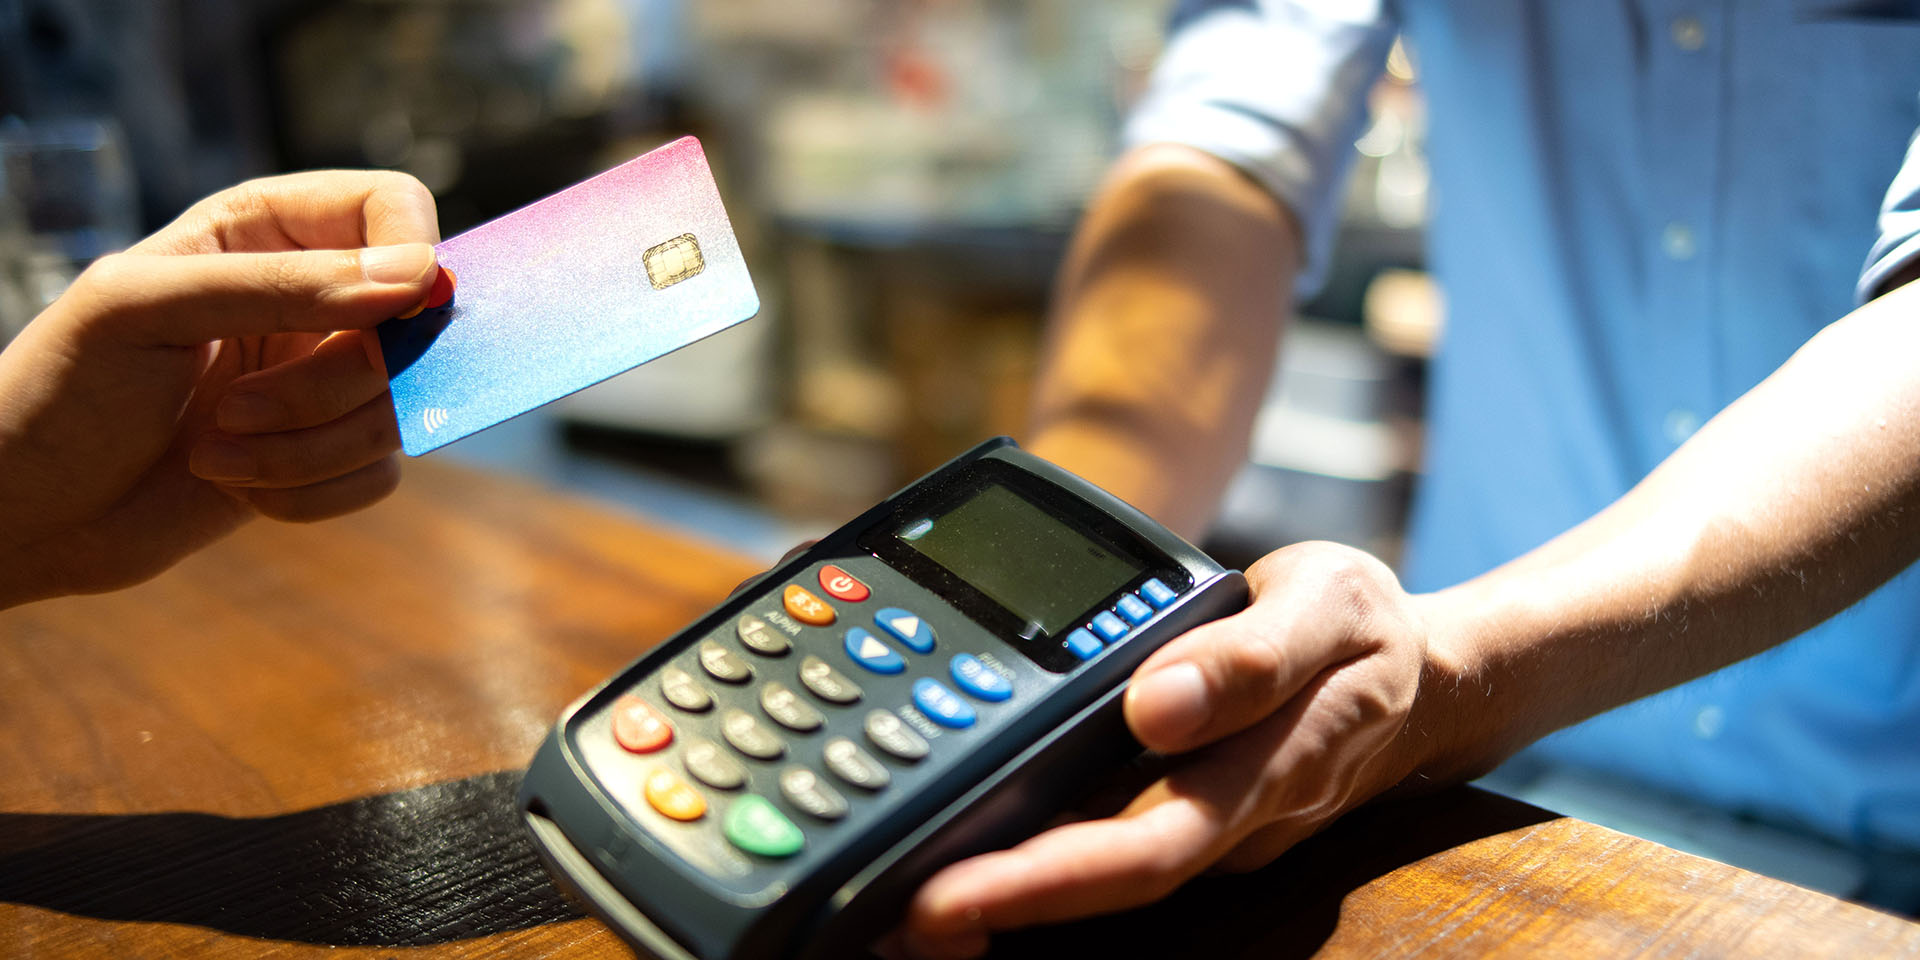 Credit card payment machine